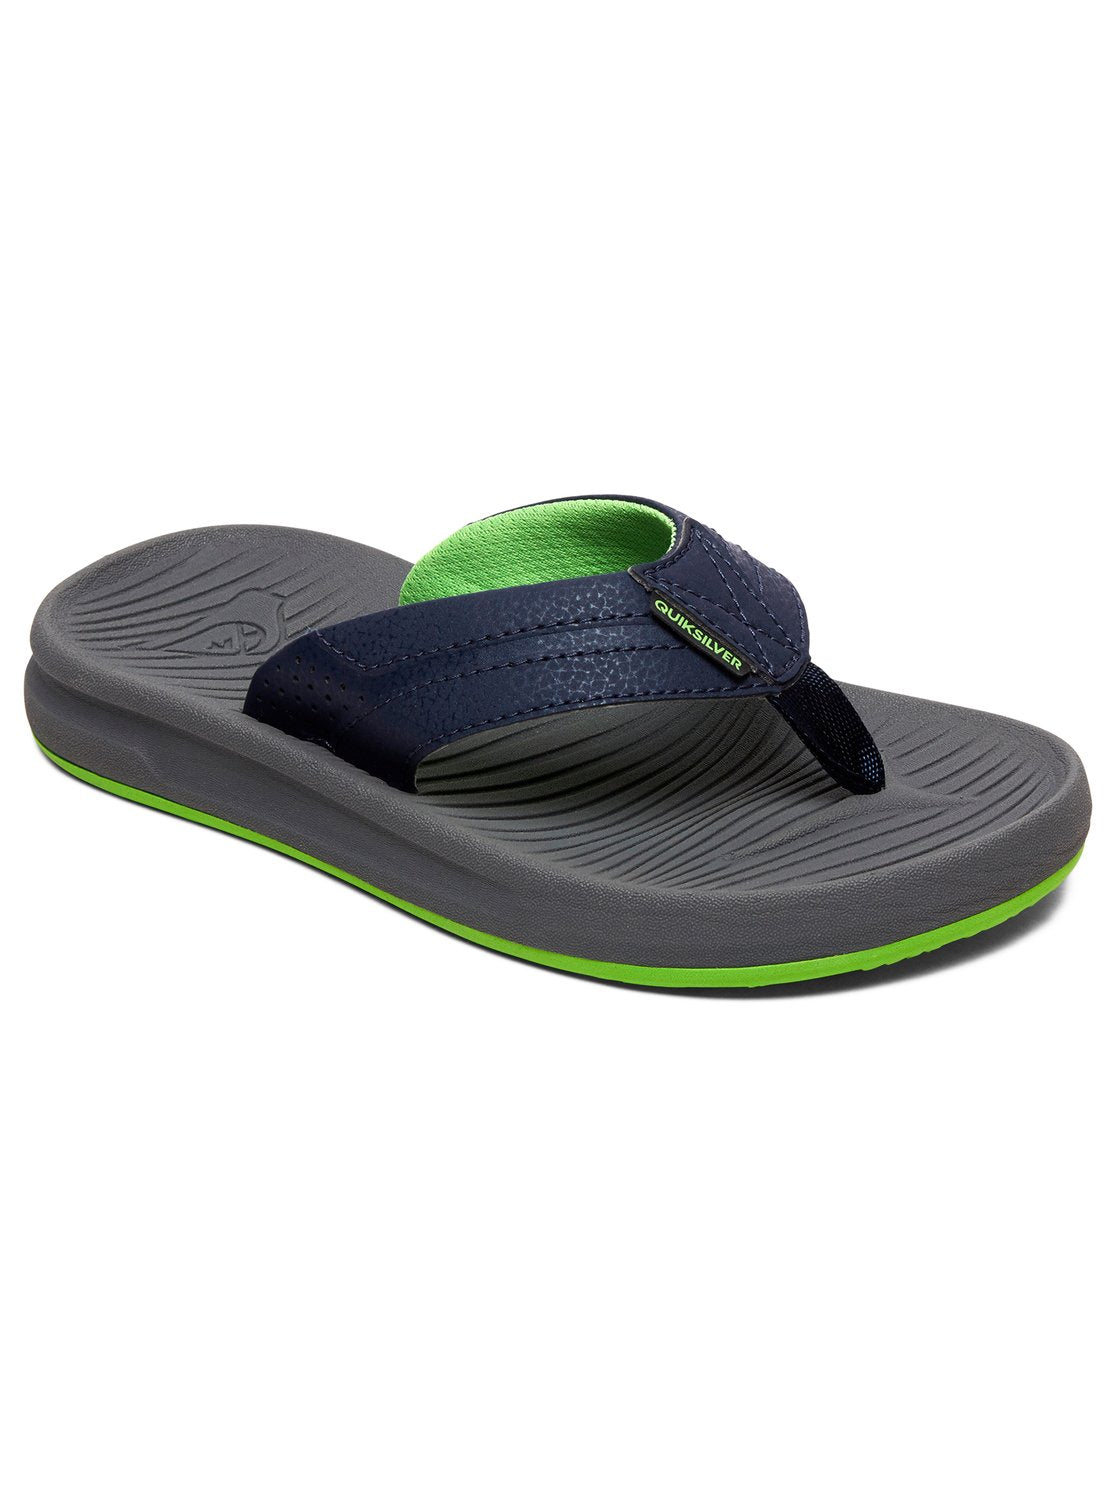 Quiksilver Oasis Youth Sandals XBSB-Blue-Grey-Blue 12 C